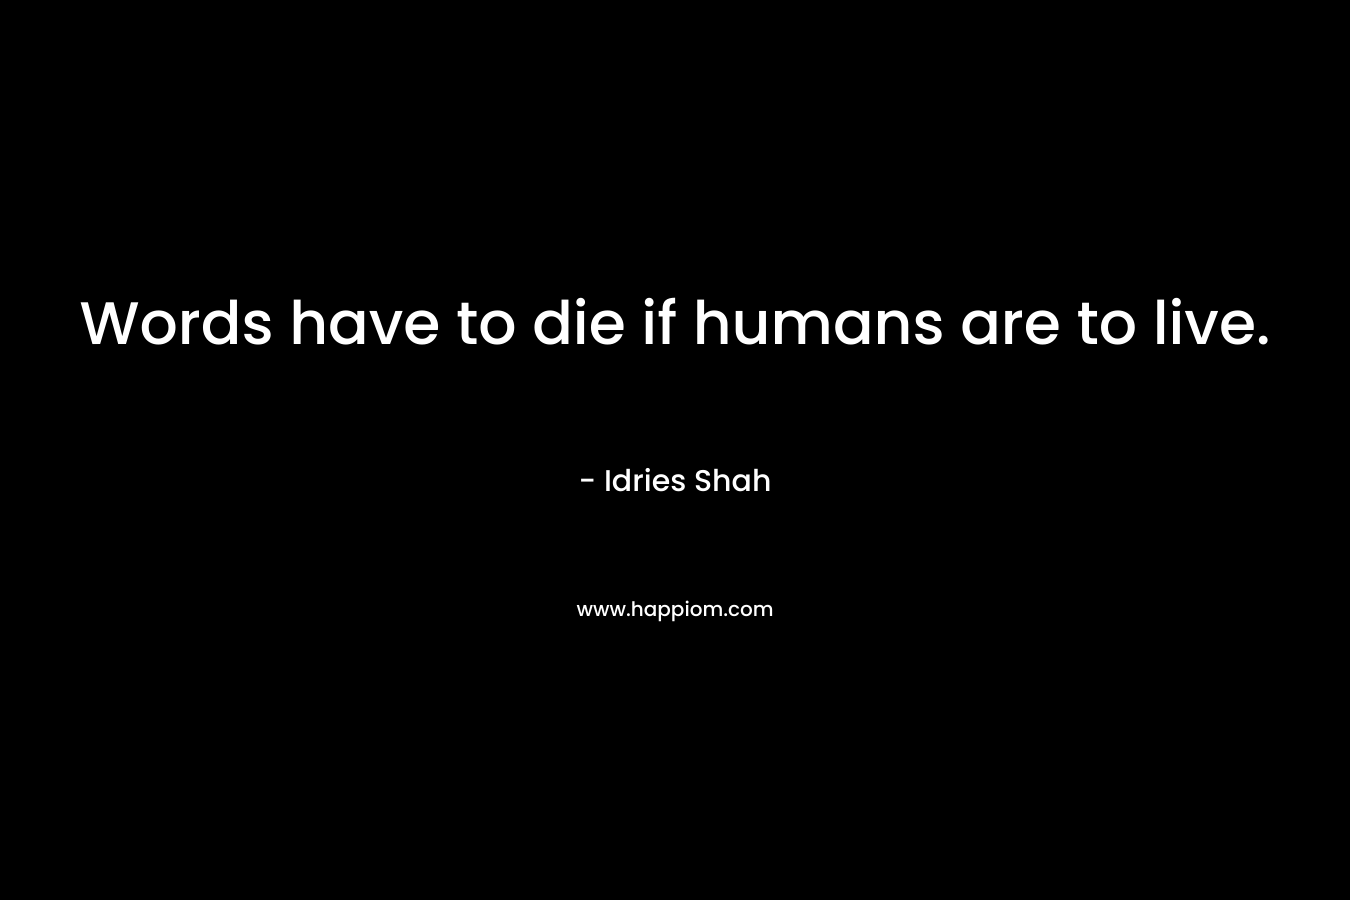 Words have to die if humans are to live.